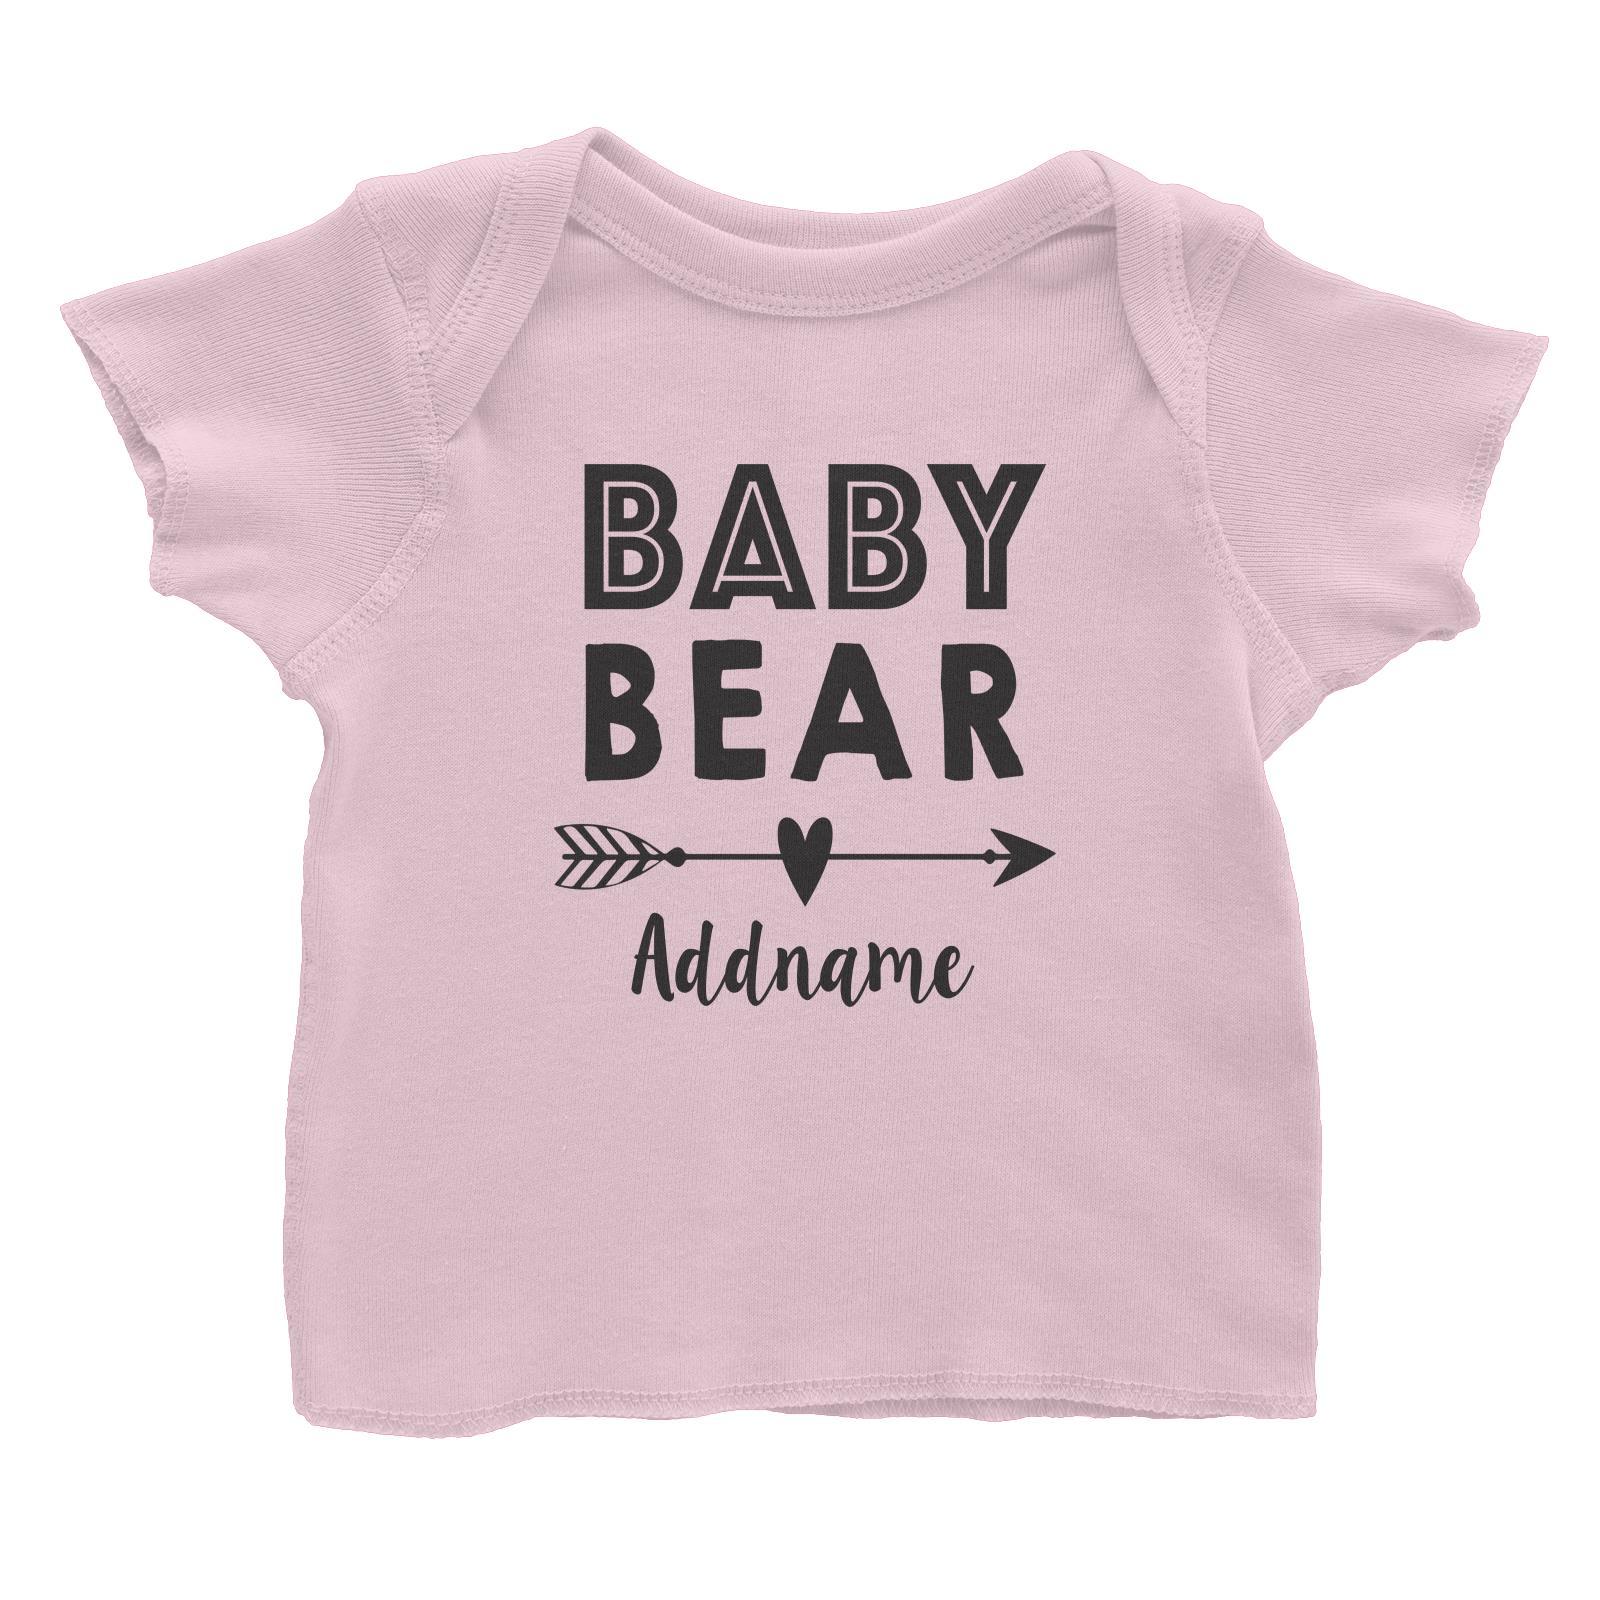 Baby Bear Addname Baby T-Shirt  Matching Family Personalizable Designs